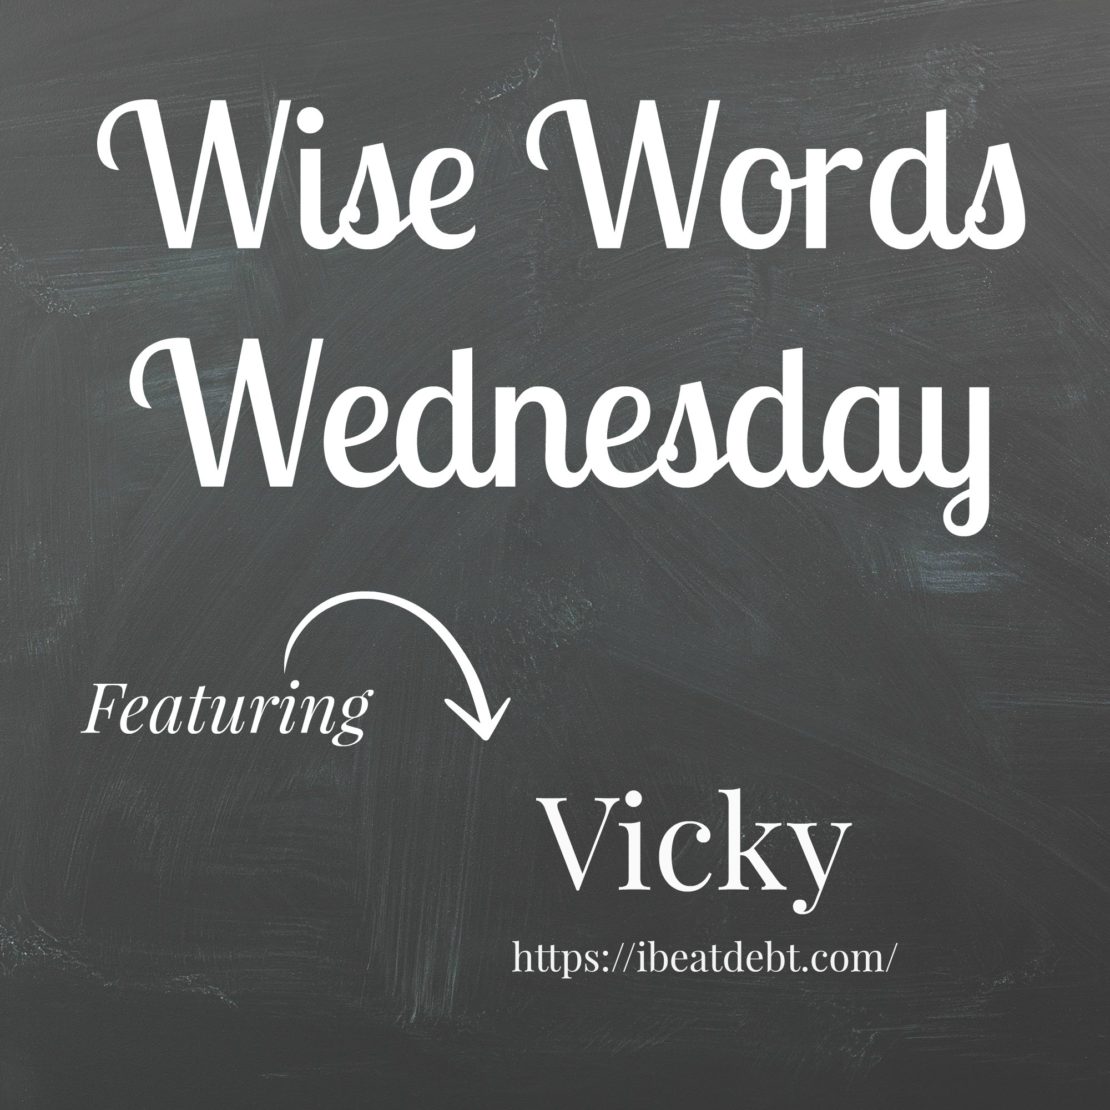 Wise Words Wednesday with Vicky